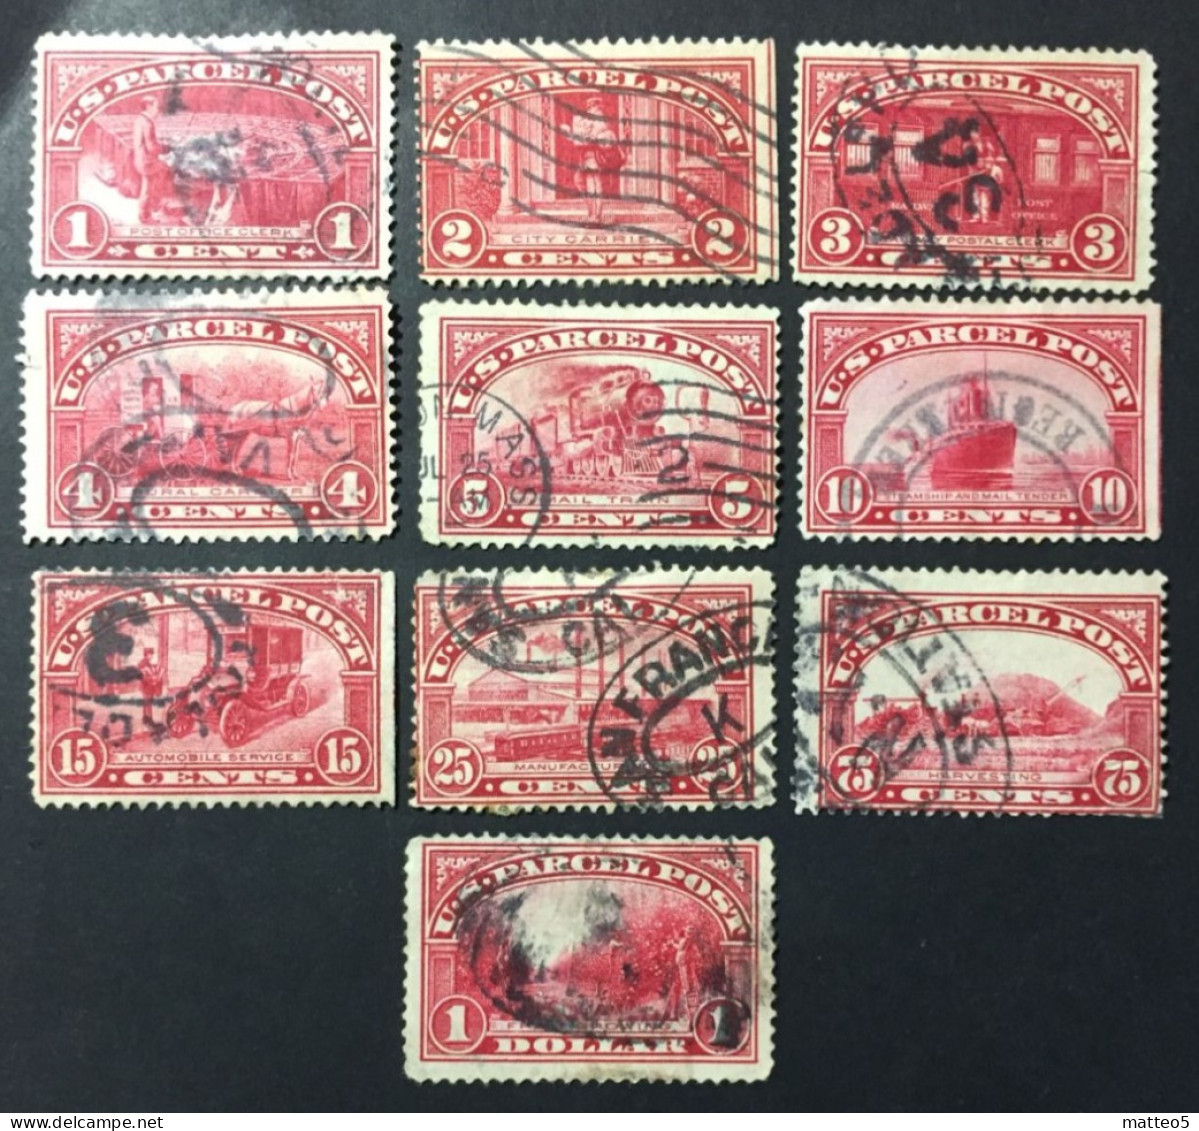 1912 - United States - Parcel Post Colonies Postage Due With - 10 Stamps - Used - Dienstmarken